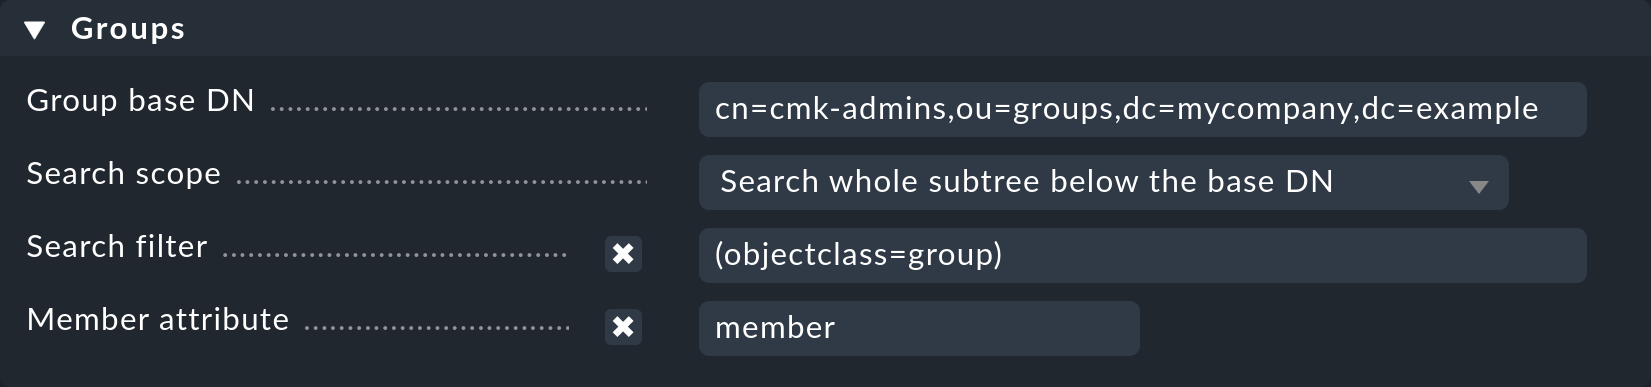 ldap new connection groups